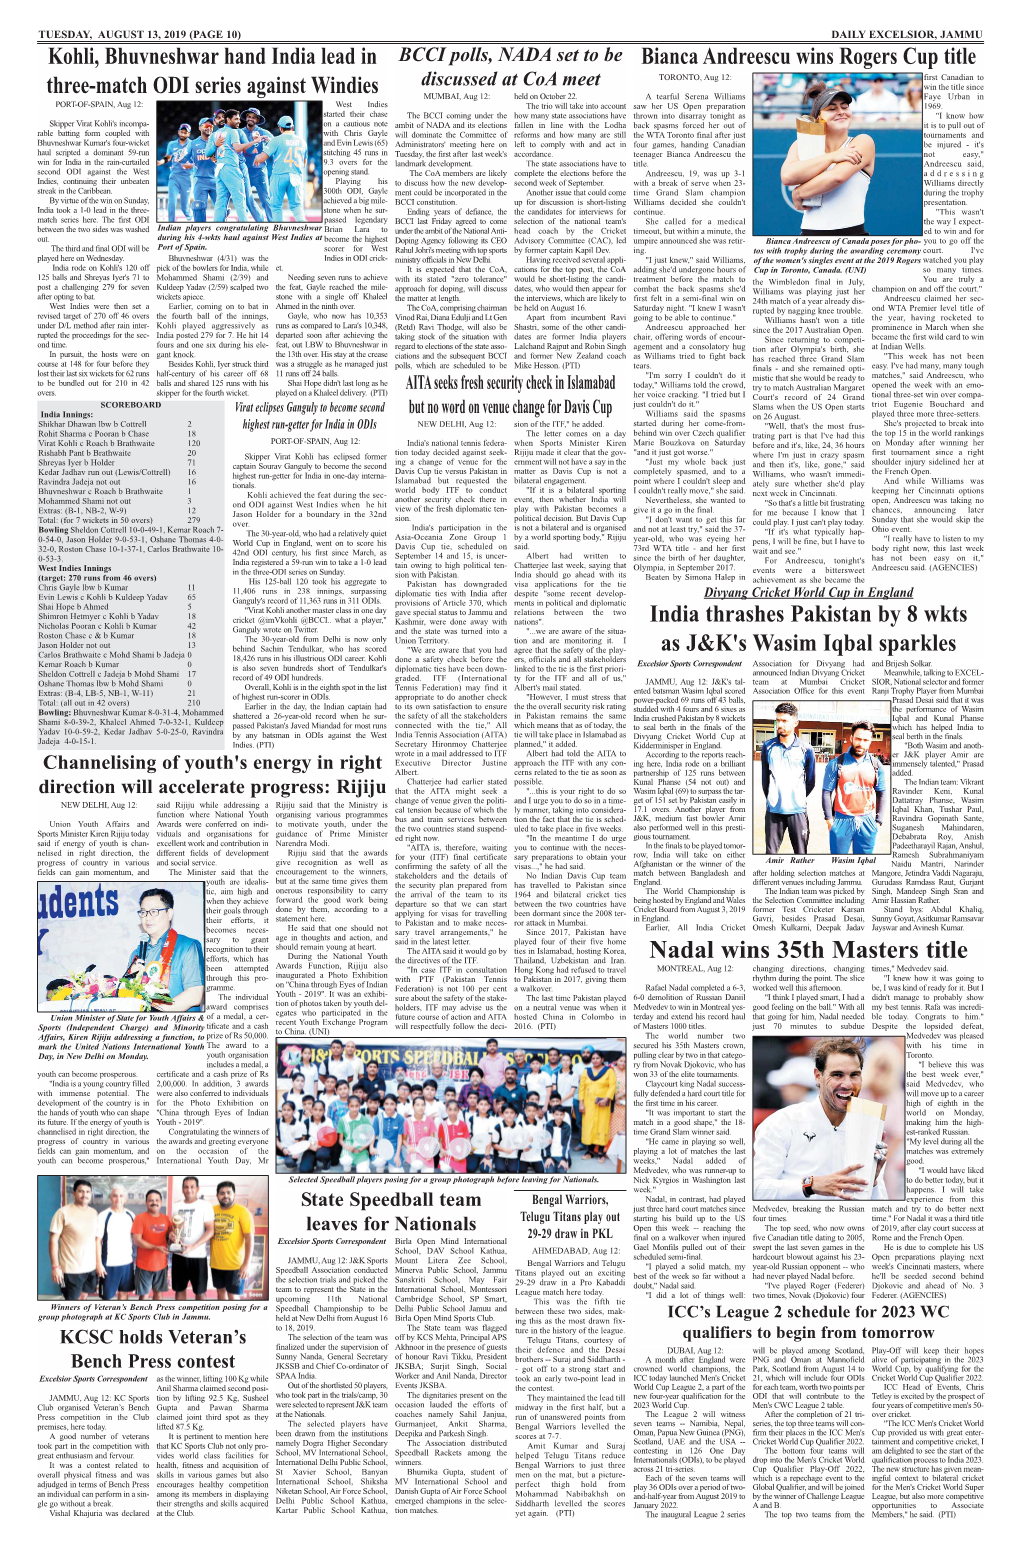 Page10sports.Qxd (Page 1)